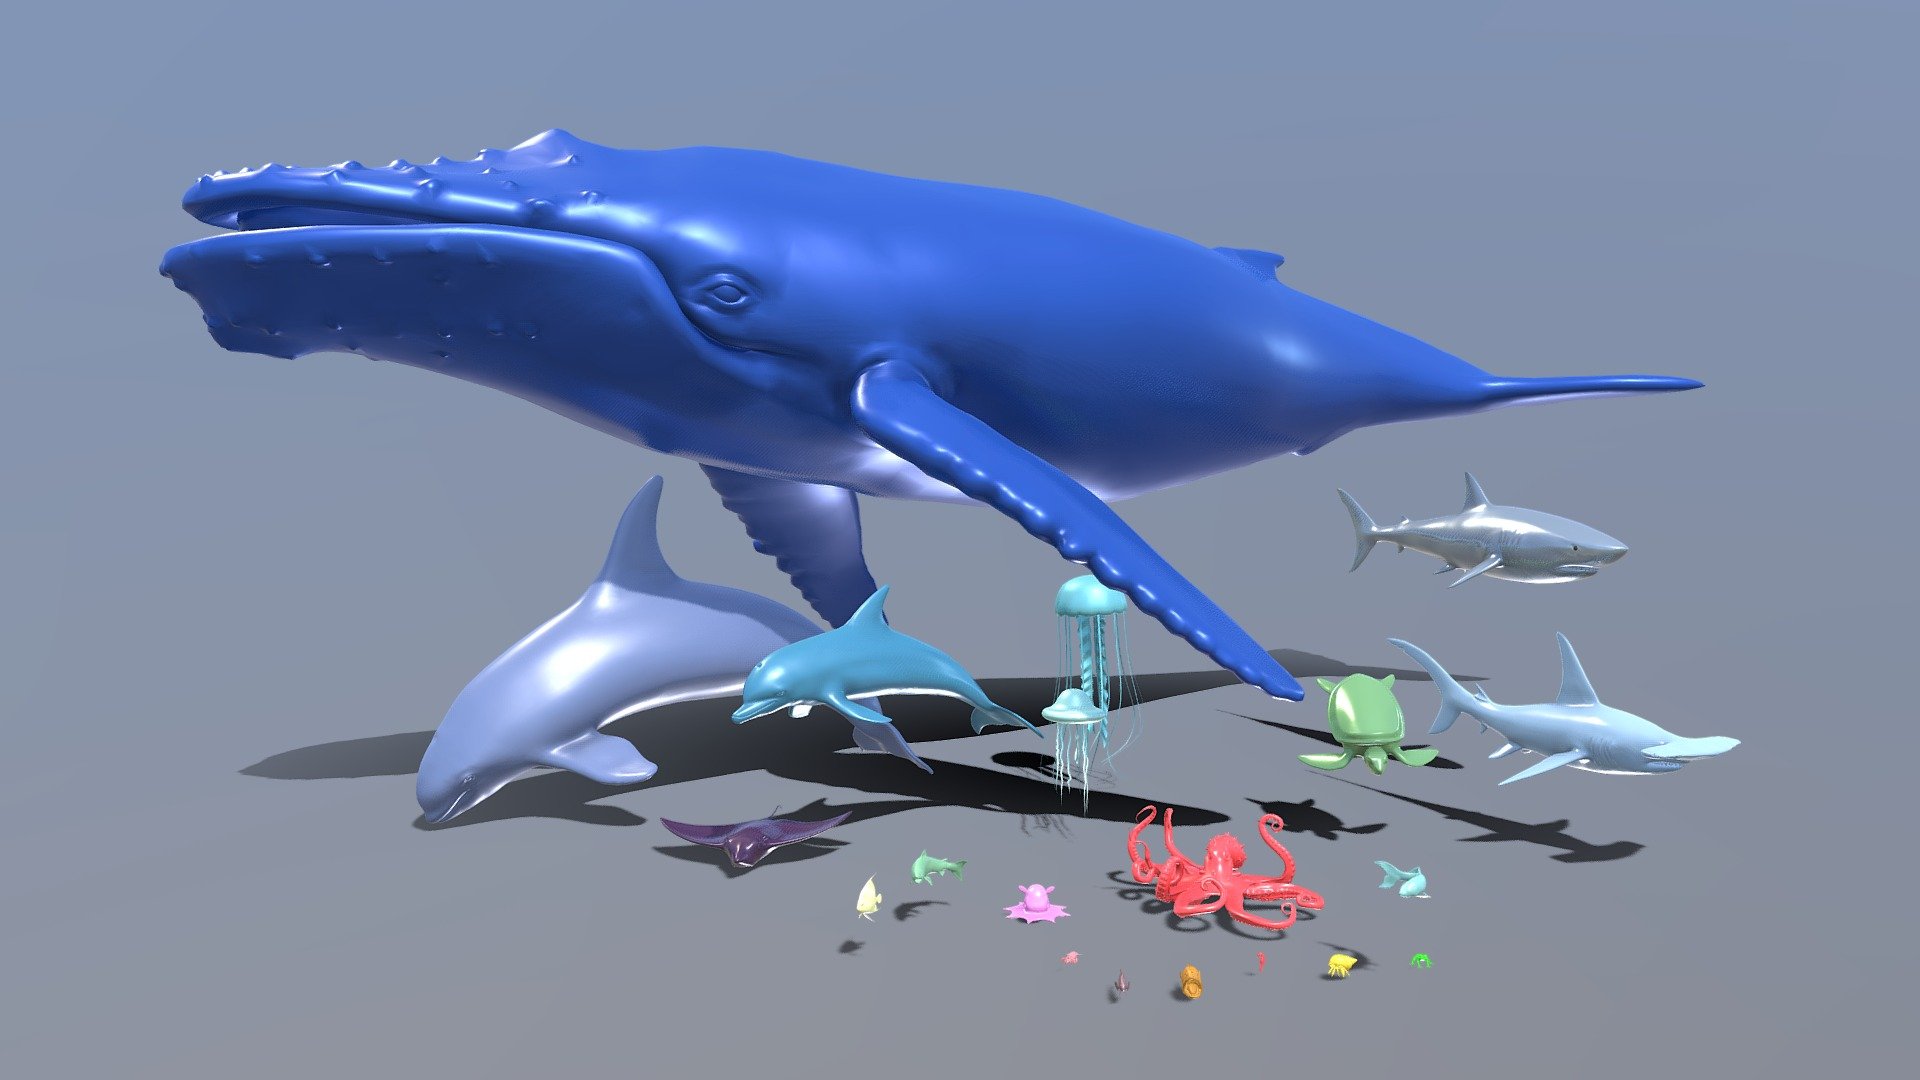 Also today, we have Sea Creatures.

Something really useful for the 300 subs benchmark.. stock animals for all. 

Yaaaaaay&hellip; high fives all around.

Check out my other upload Animals of the Land for more free stuff and/or their terrestrial bretheren-sis. 3d model